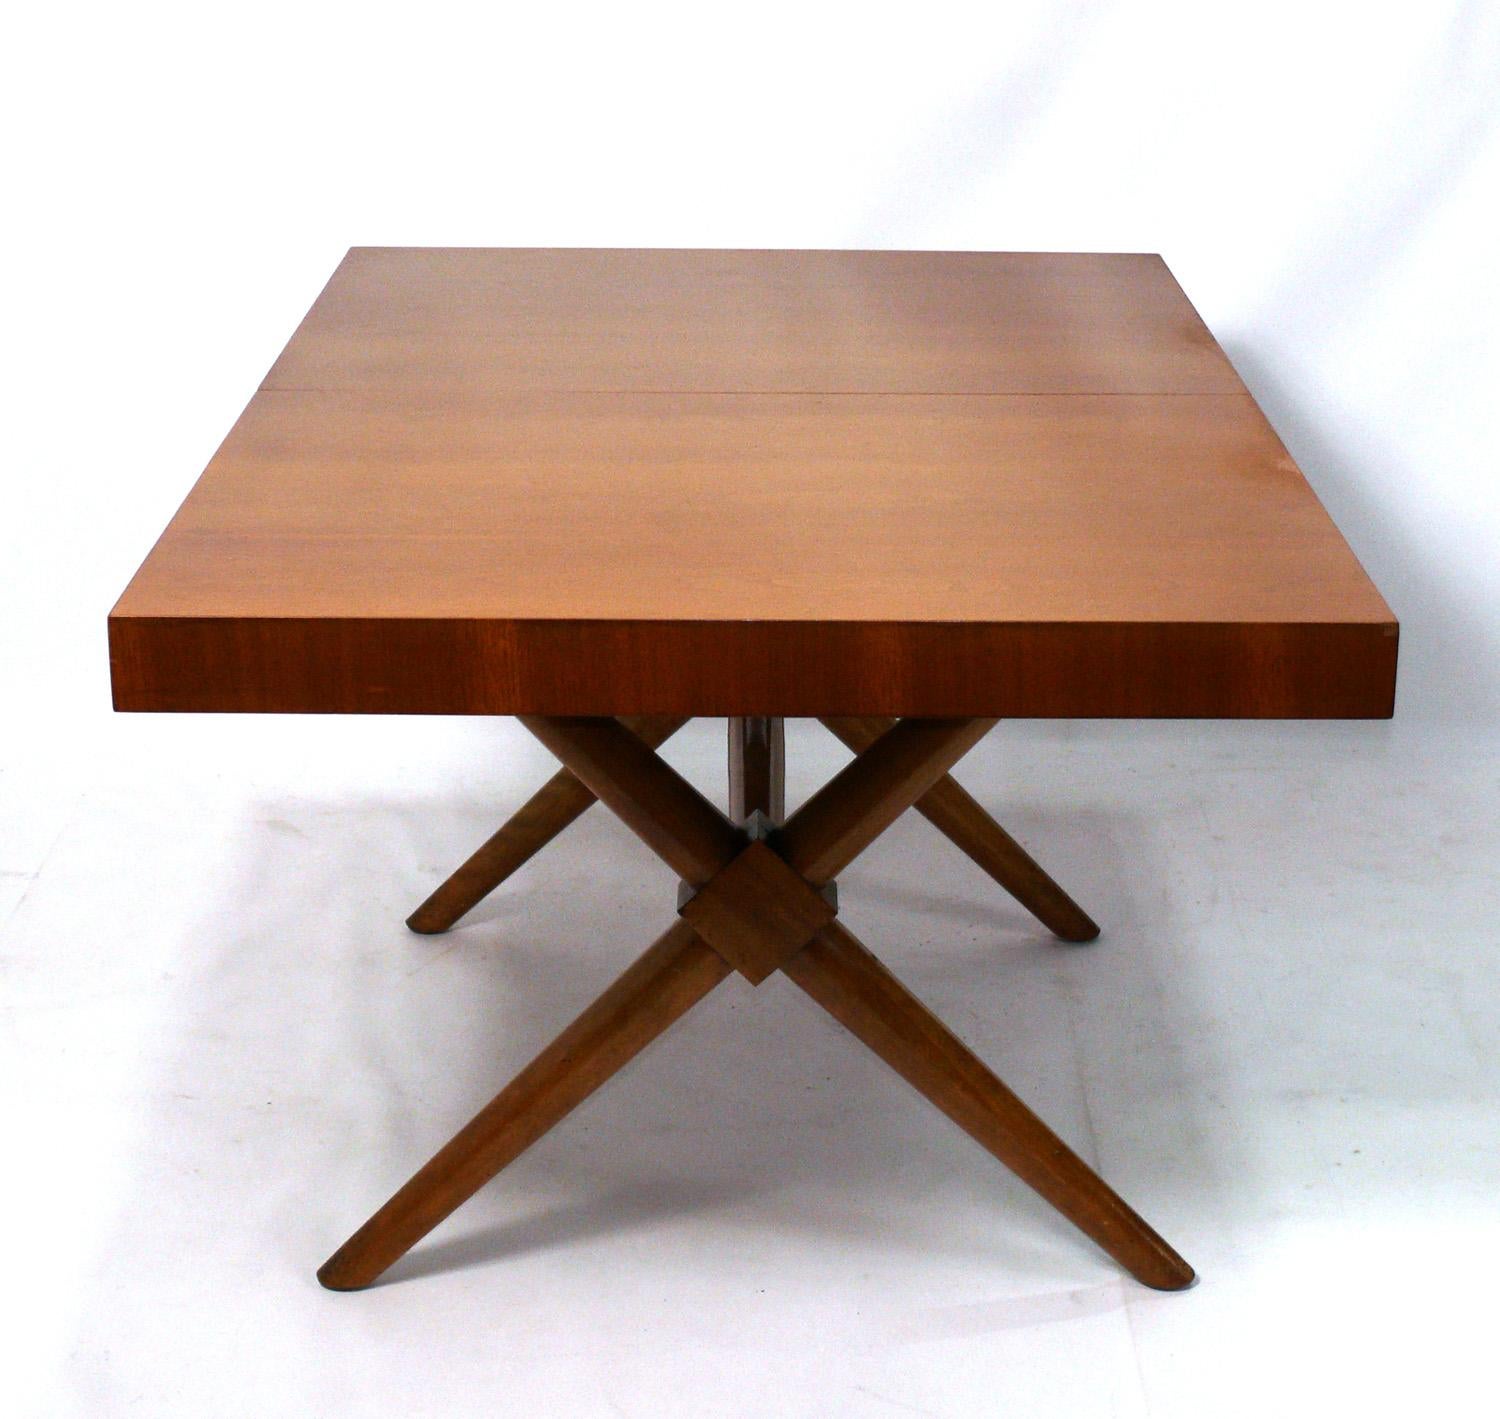 Sculptural X Base Dining Table, designed by T.H. Robsjohn Gibbings for Widdicomb, American, circa 1950s. This dining table is currently being refinished and can be completed in your choice of color. The price noted INCLUDES refinishing in your